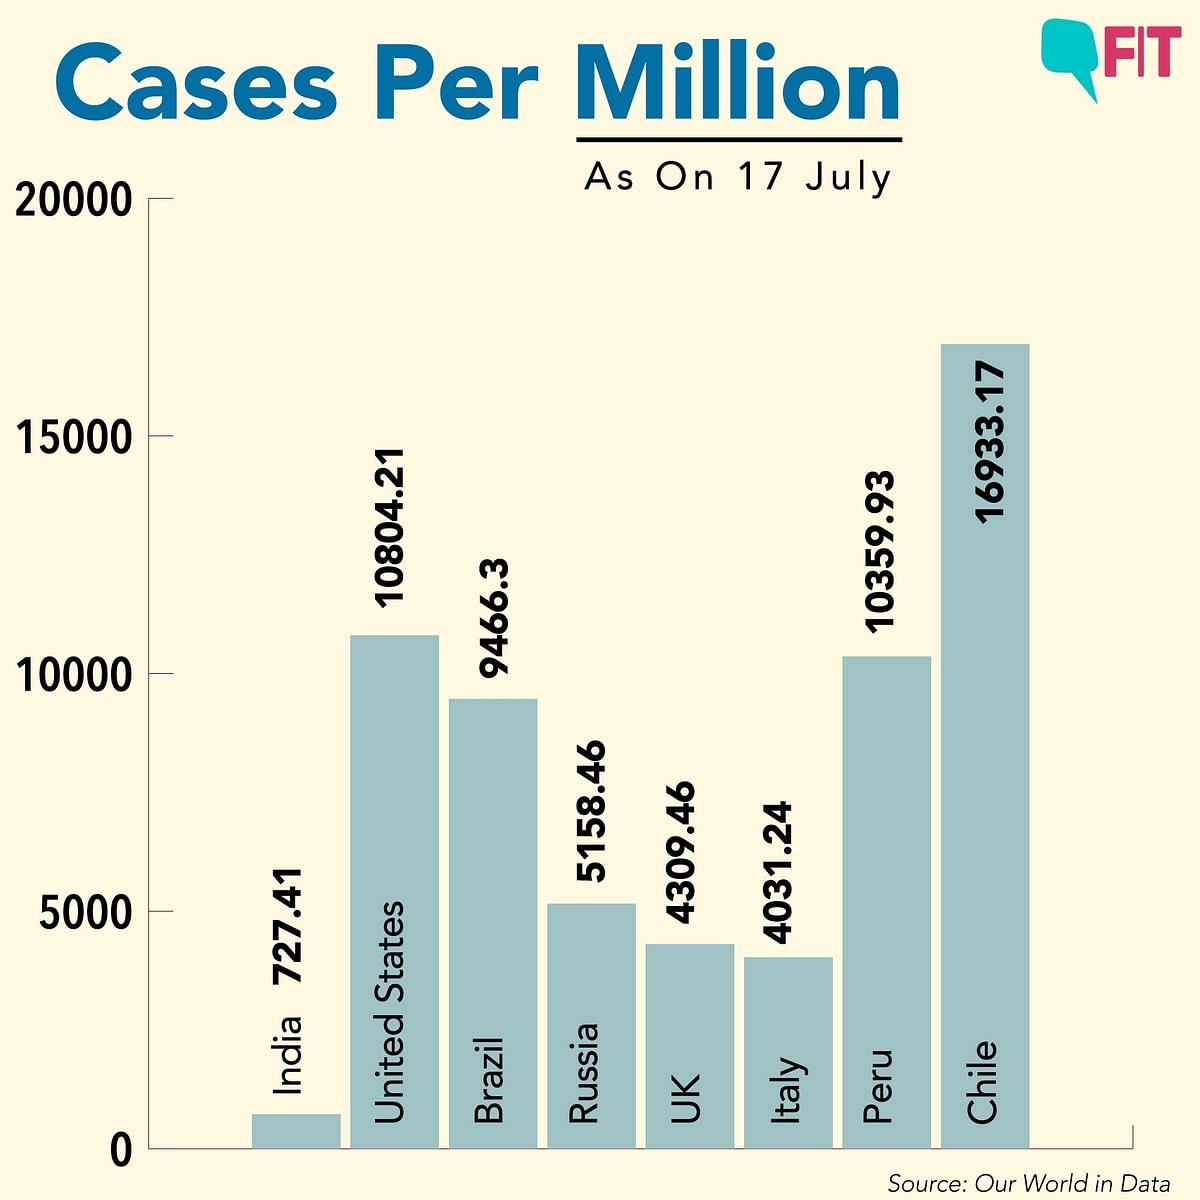 India became the third country in the world to cross a million cases, after the United States and Brazil.